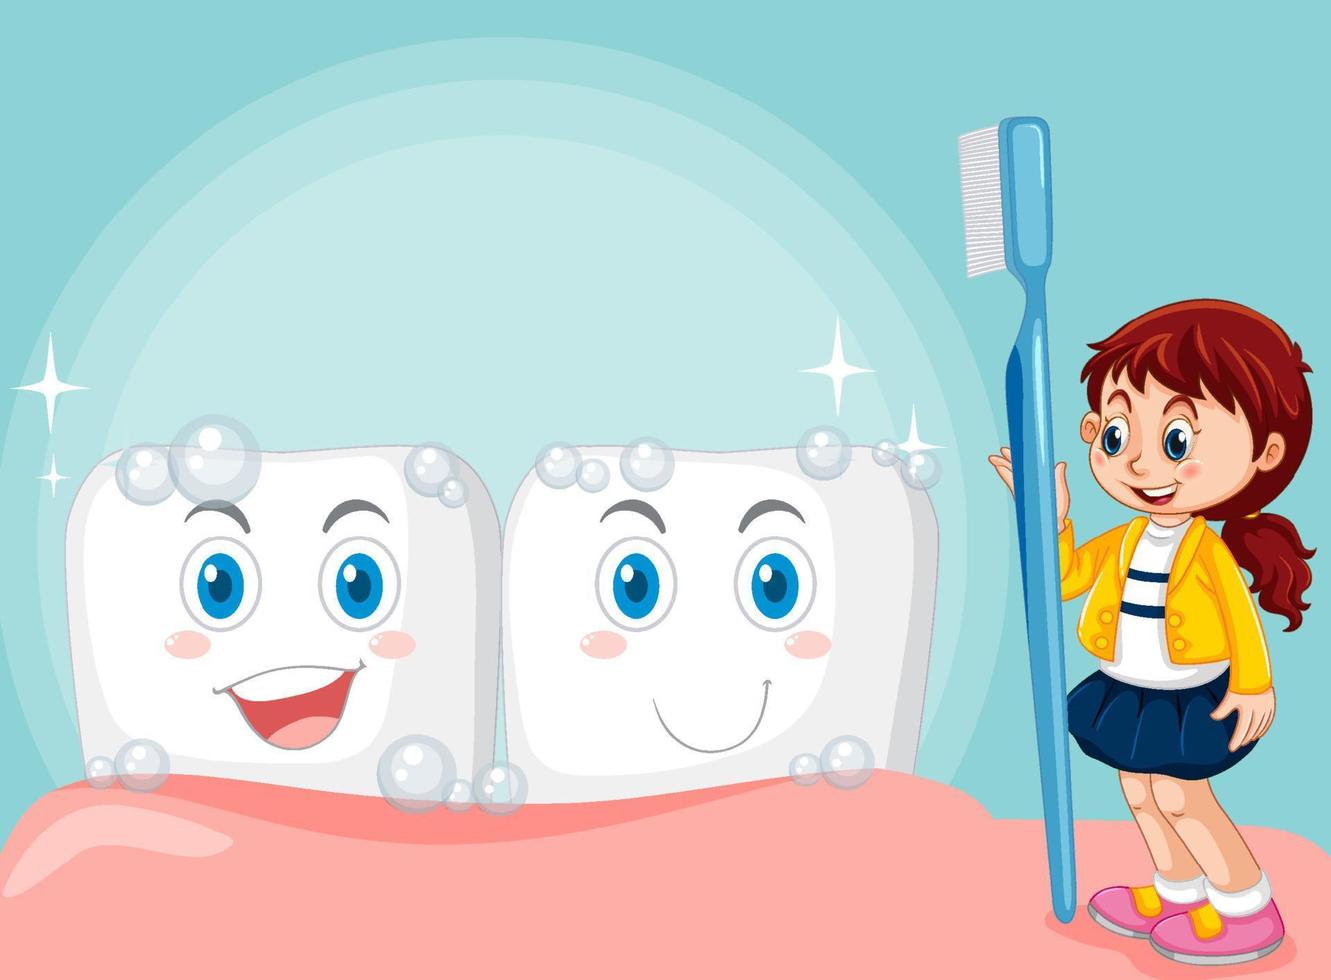 A little girl holding toothbrush with strong teeth on white background vector